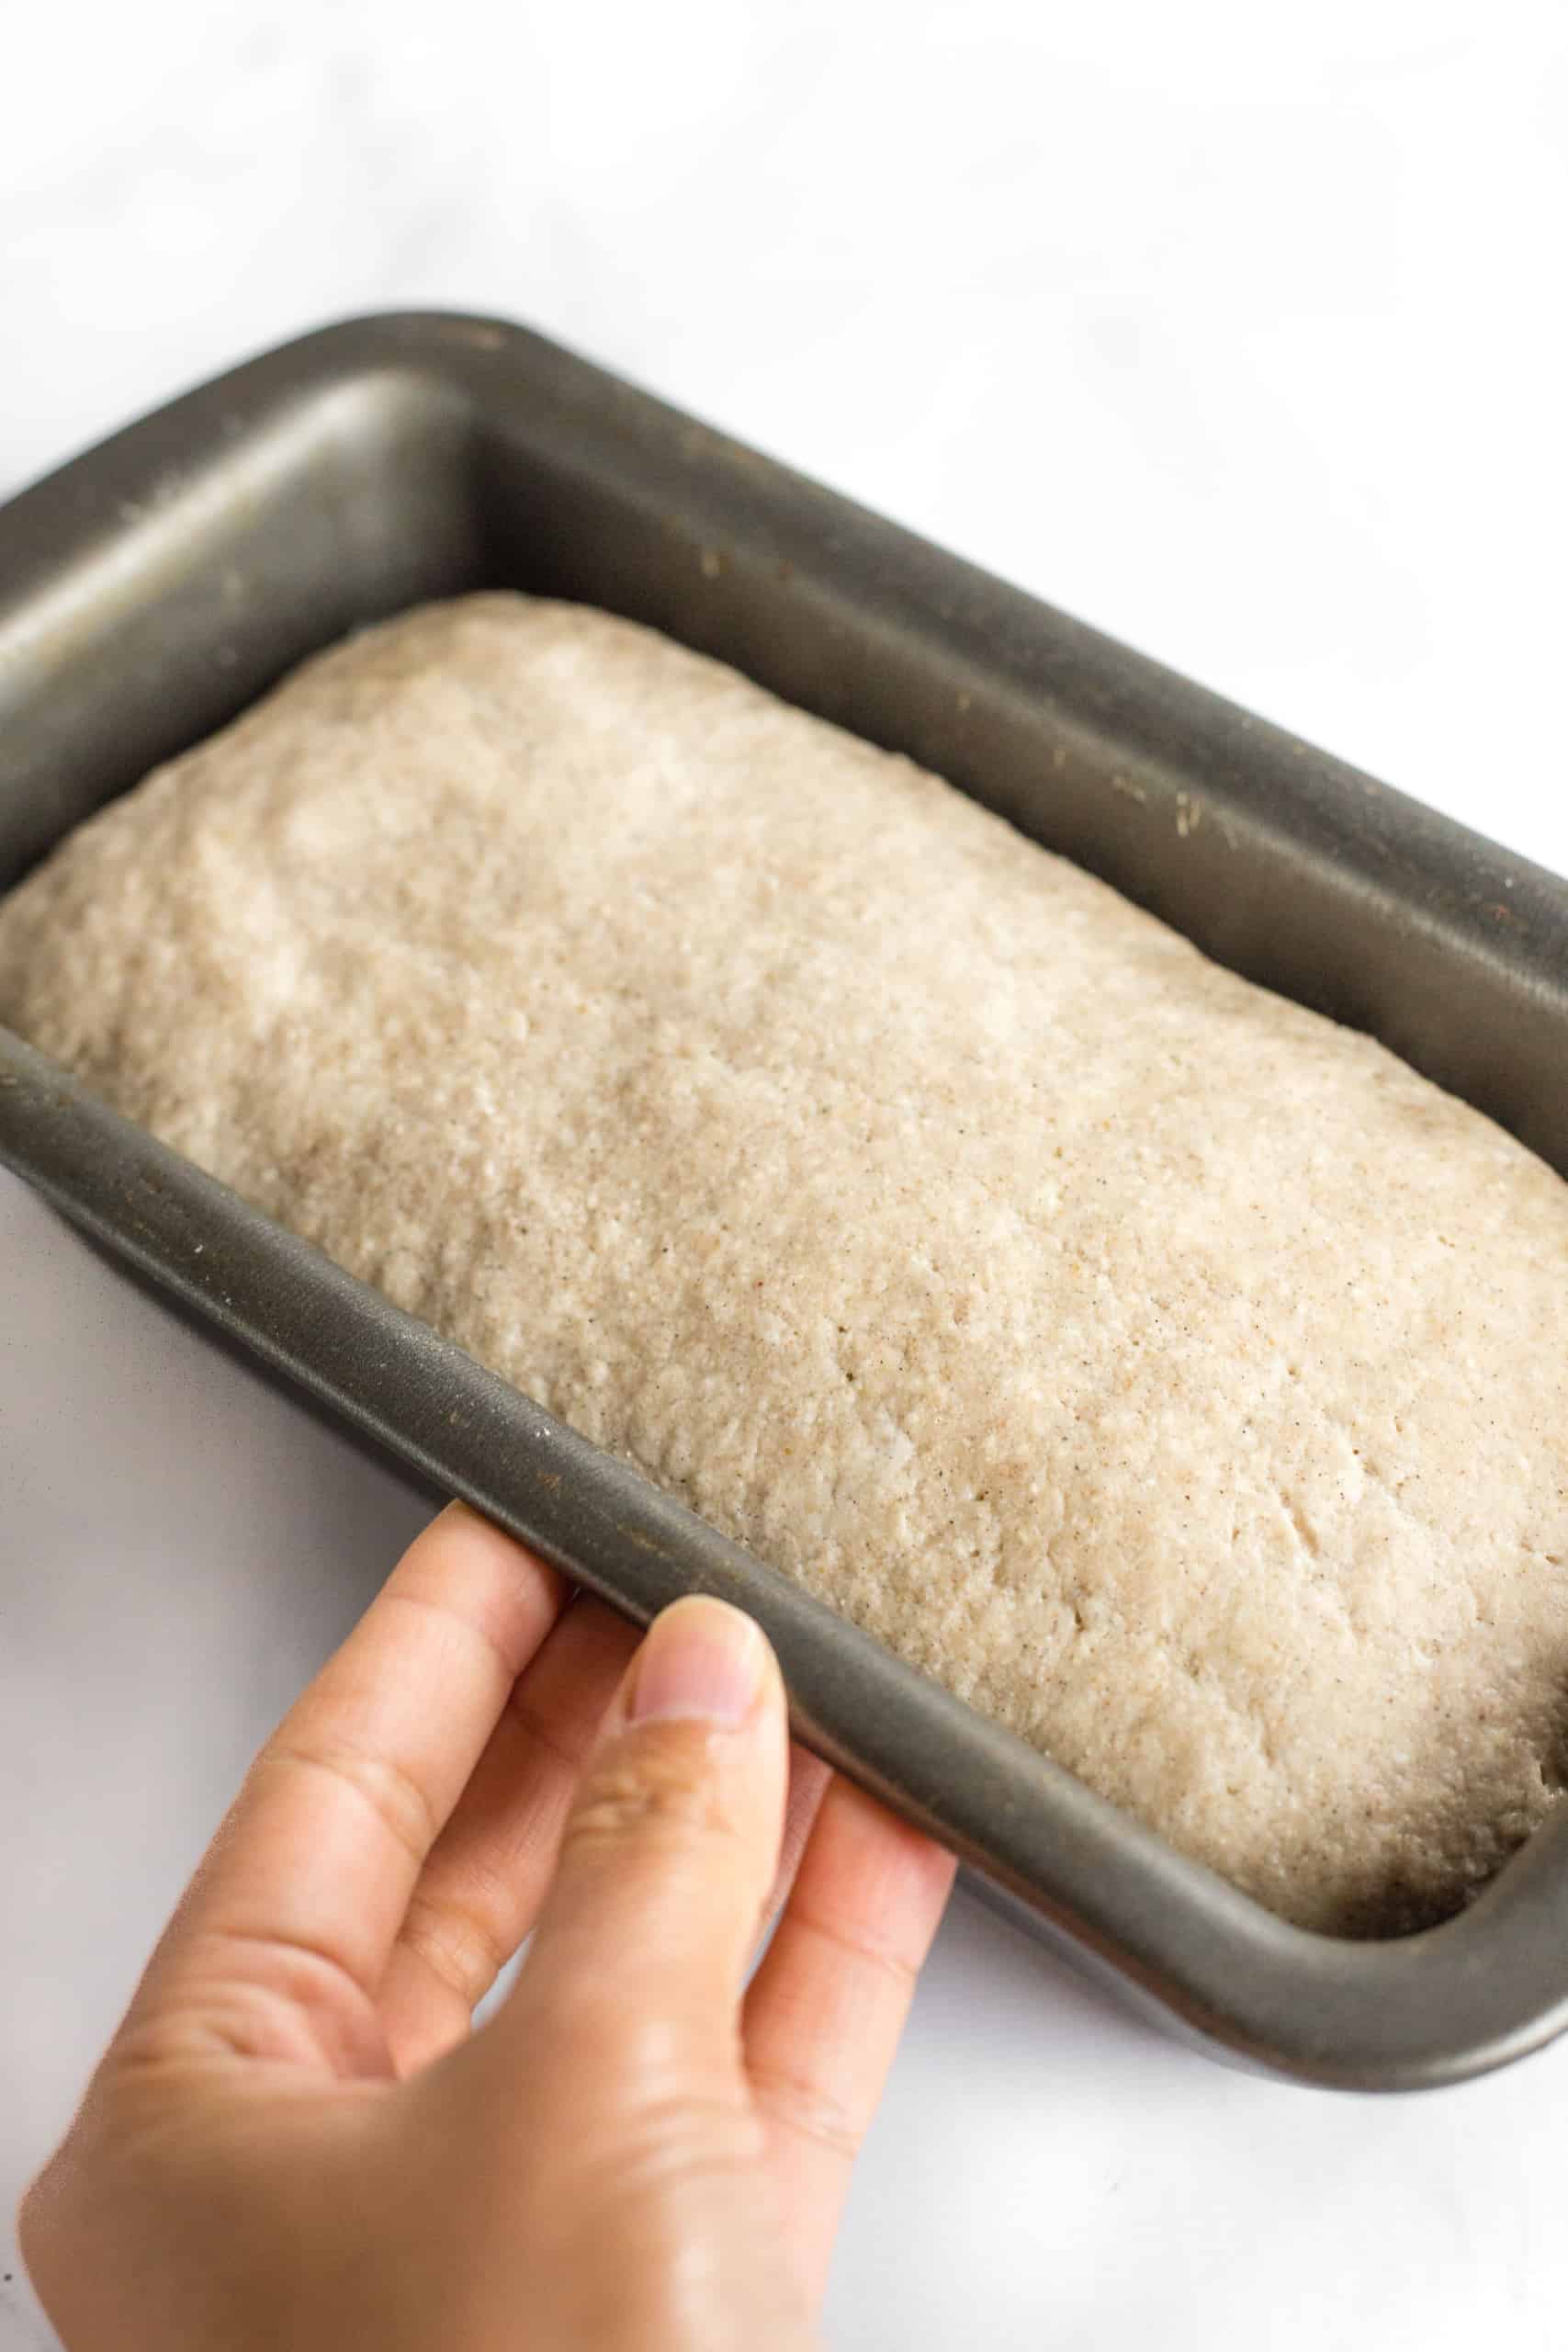 Holding a metal loaf pan with risen bread dough.